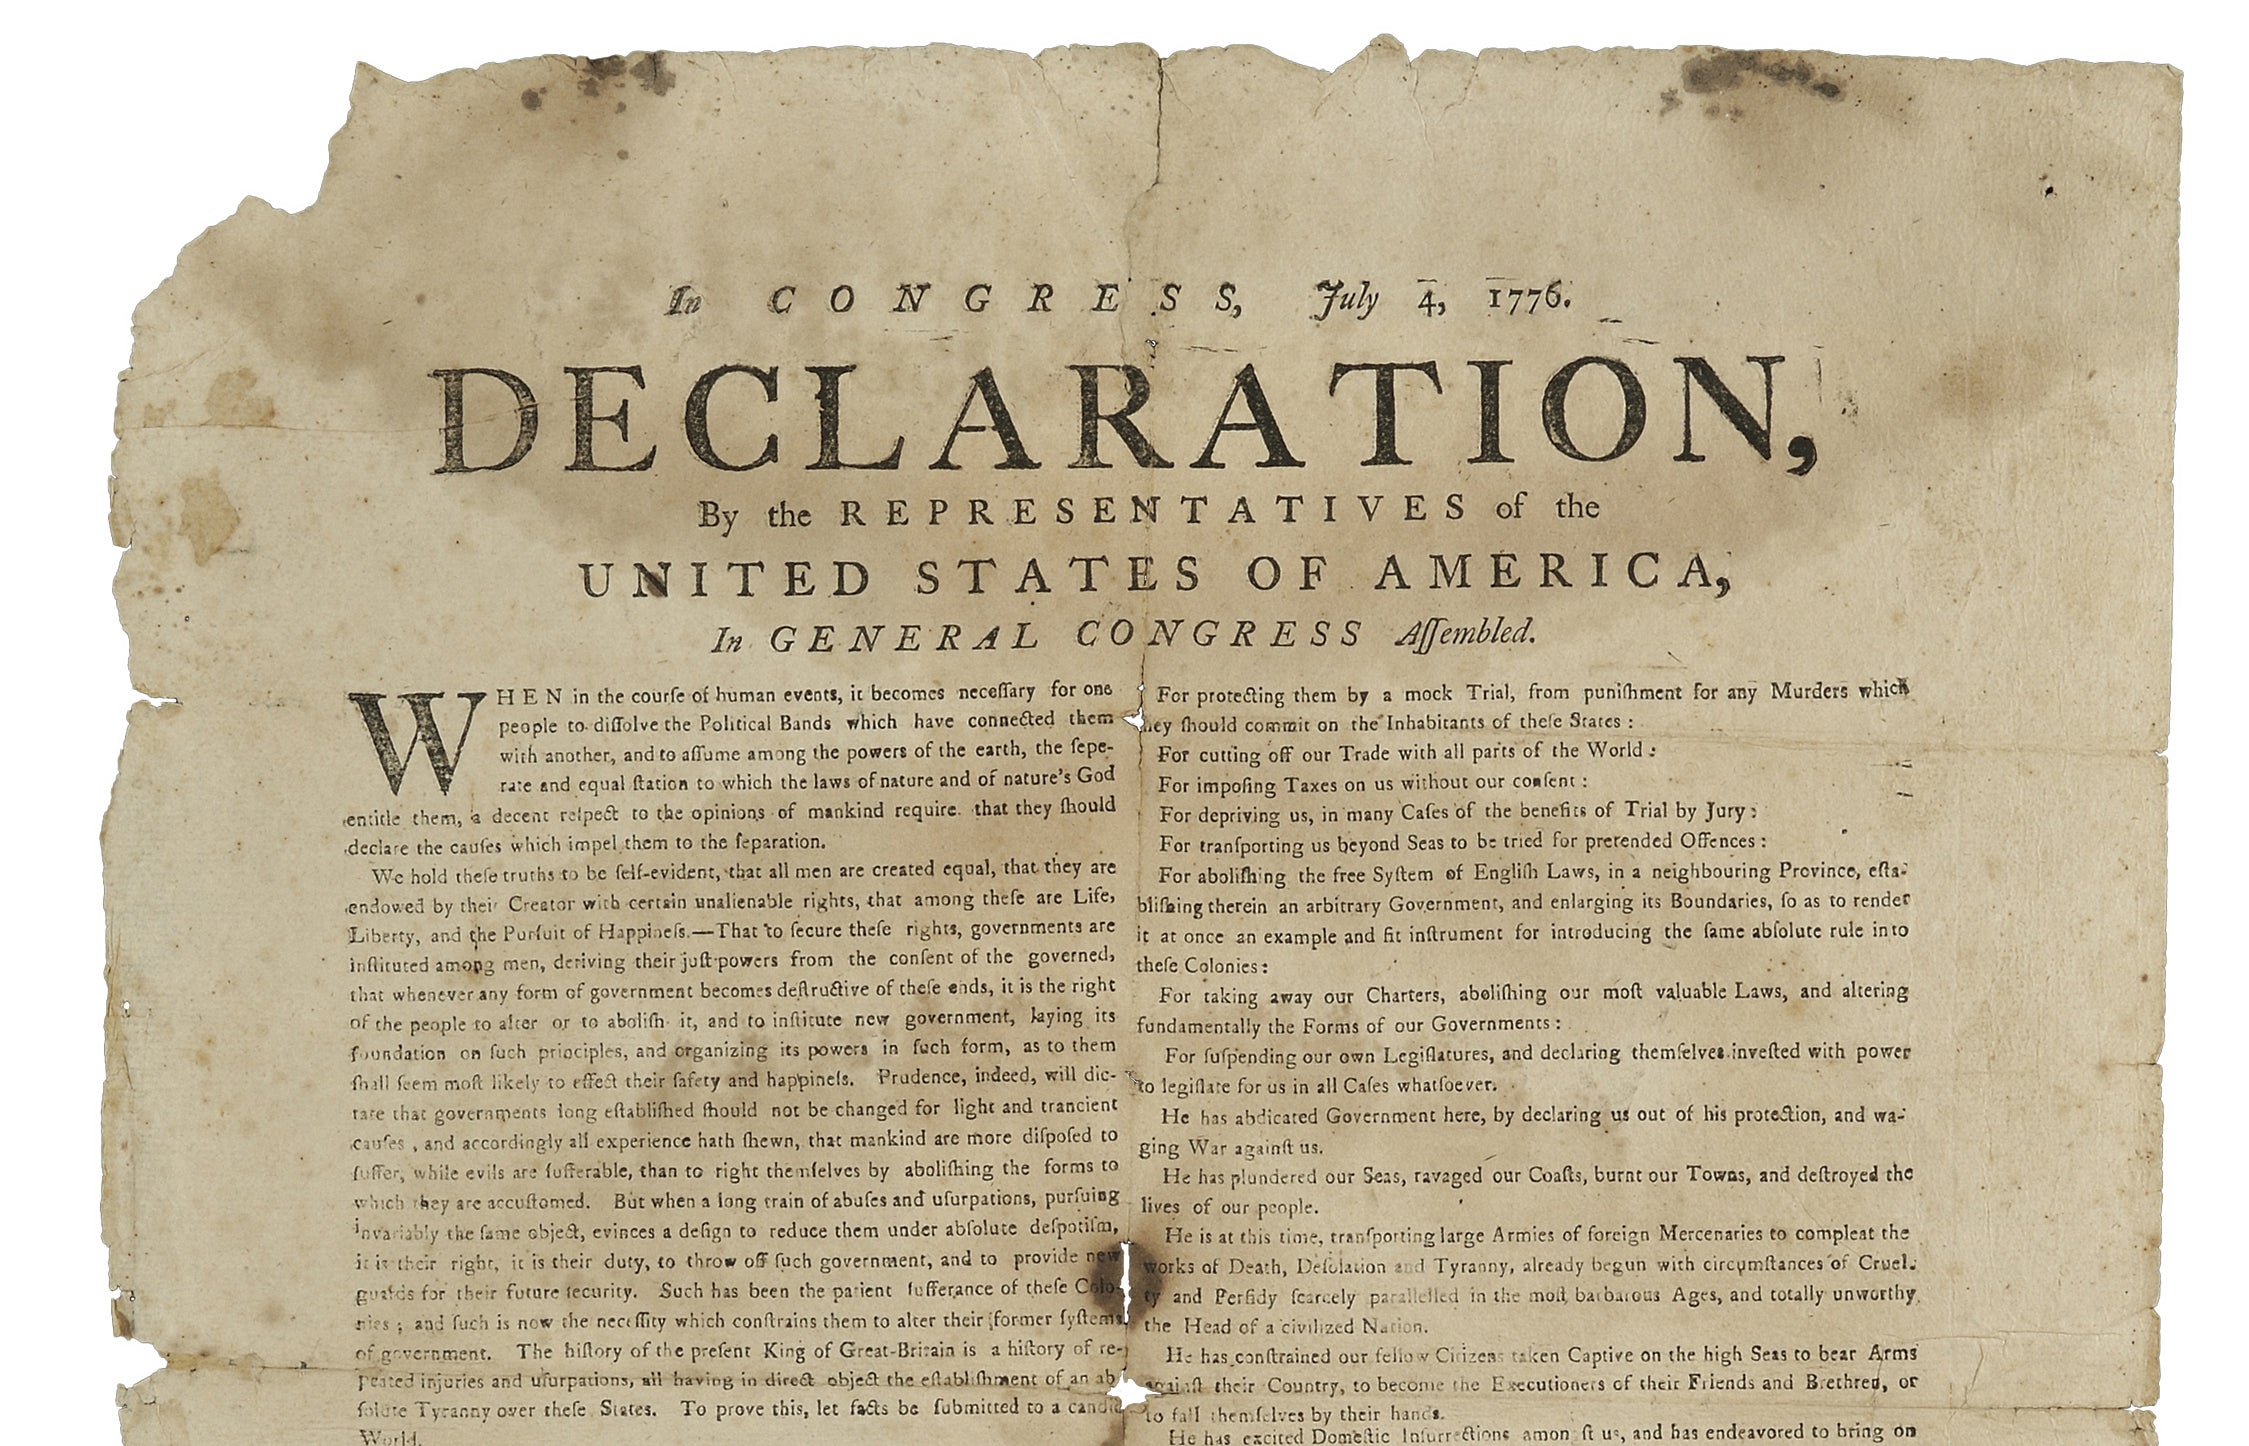 How you can see the Declaration of Independence in Boston on July 4